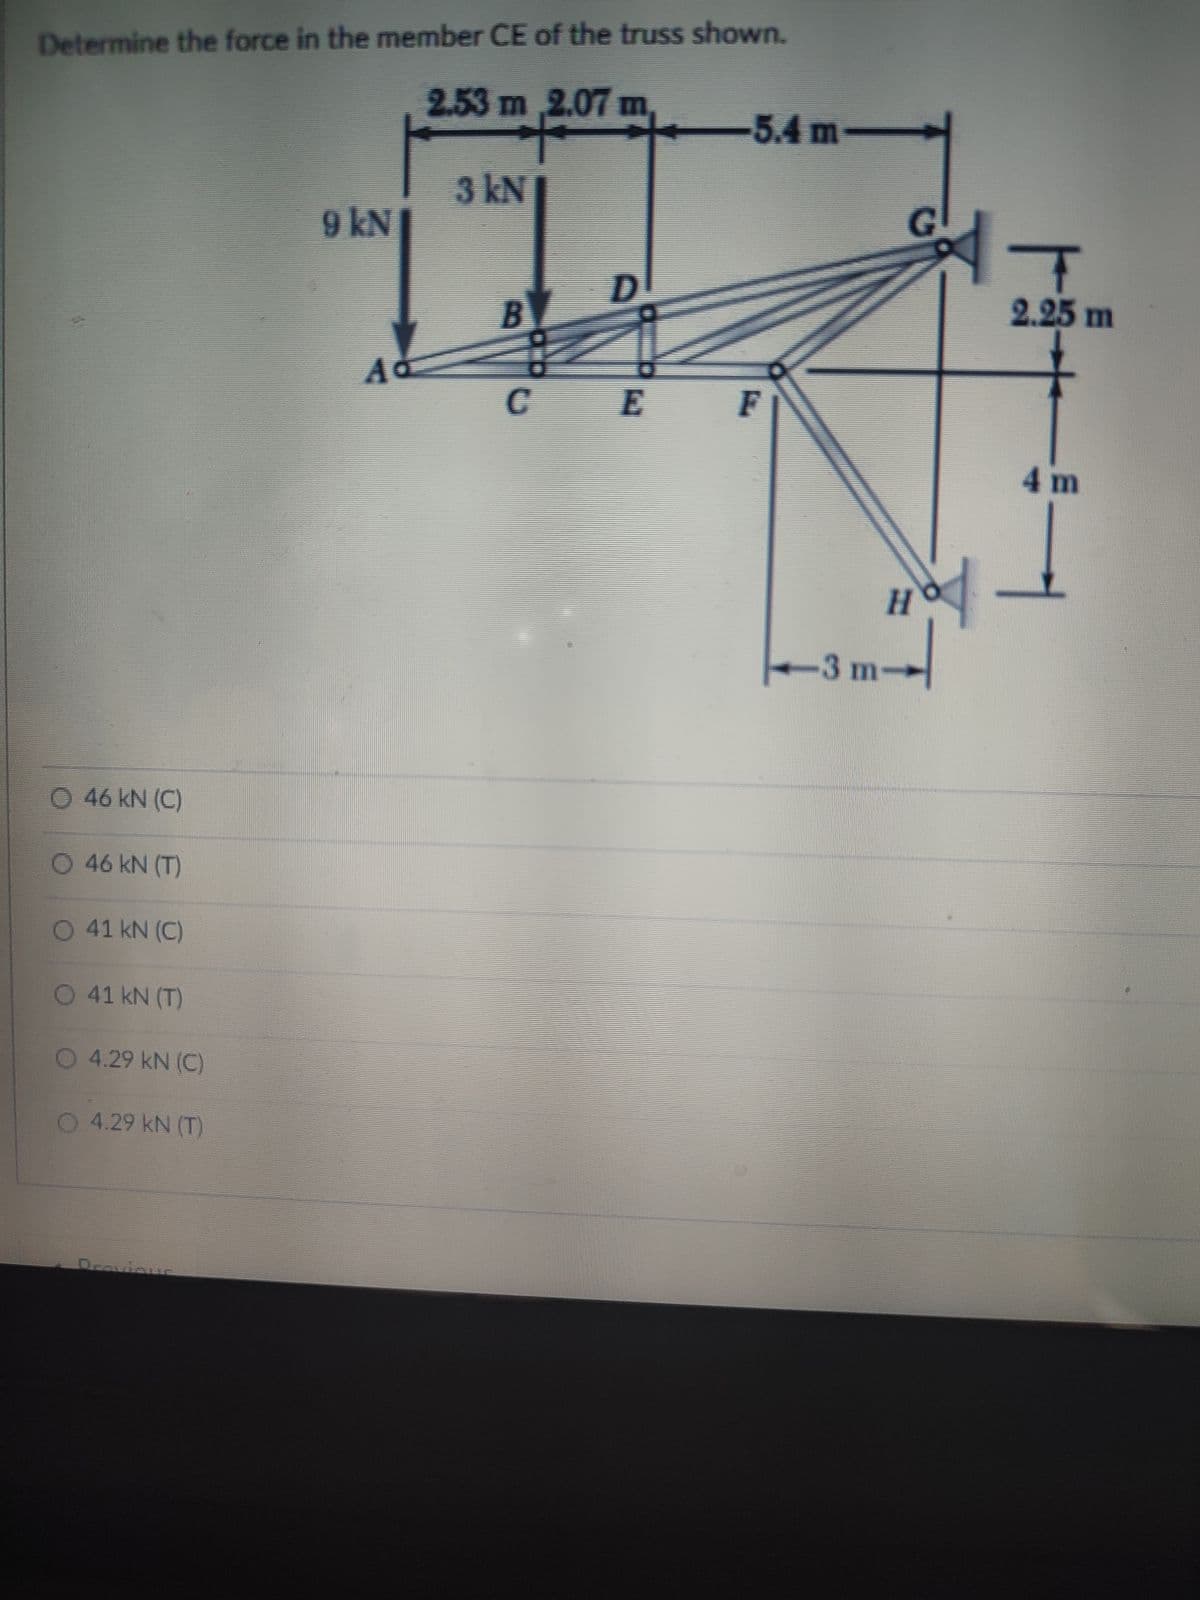 Determine the force in the member CE of the truss shown.
2.53 m 2.07 m,
-5.4 m-
3 kN
9 kN
2.25 m
CE
4 m
H.
3 m-
46 kN (C)
O 46 kN (T)
O 41 kN (C)
O 41 kN (T)
O4.29 kN (C)
O 4.29 kN (T)
Dravicus
